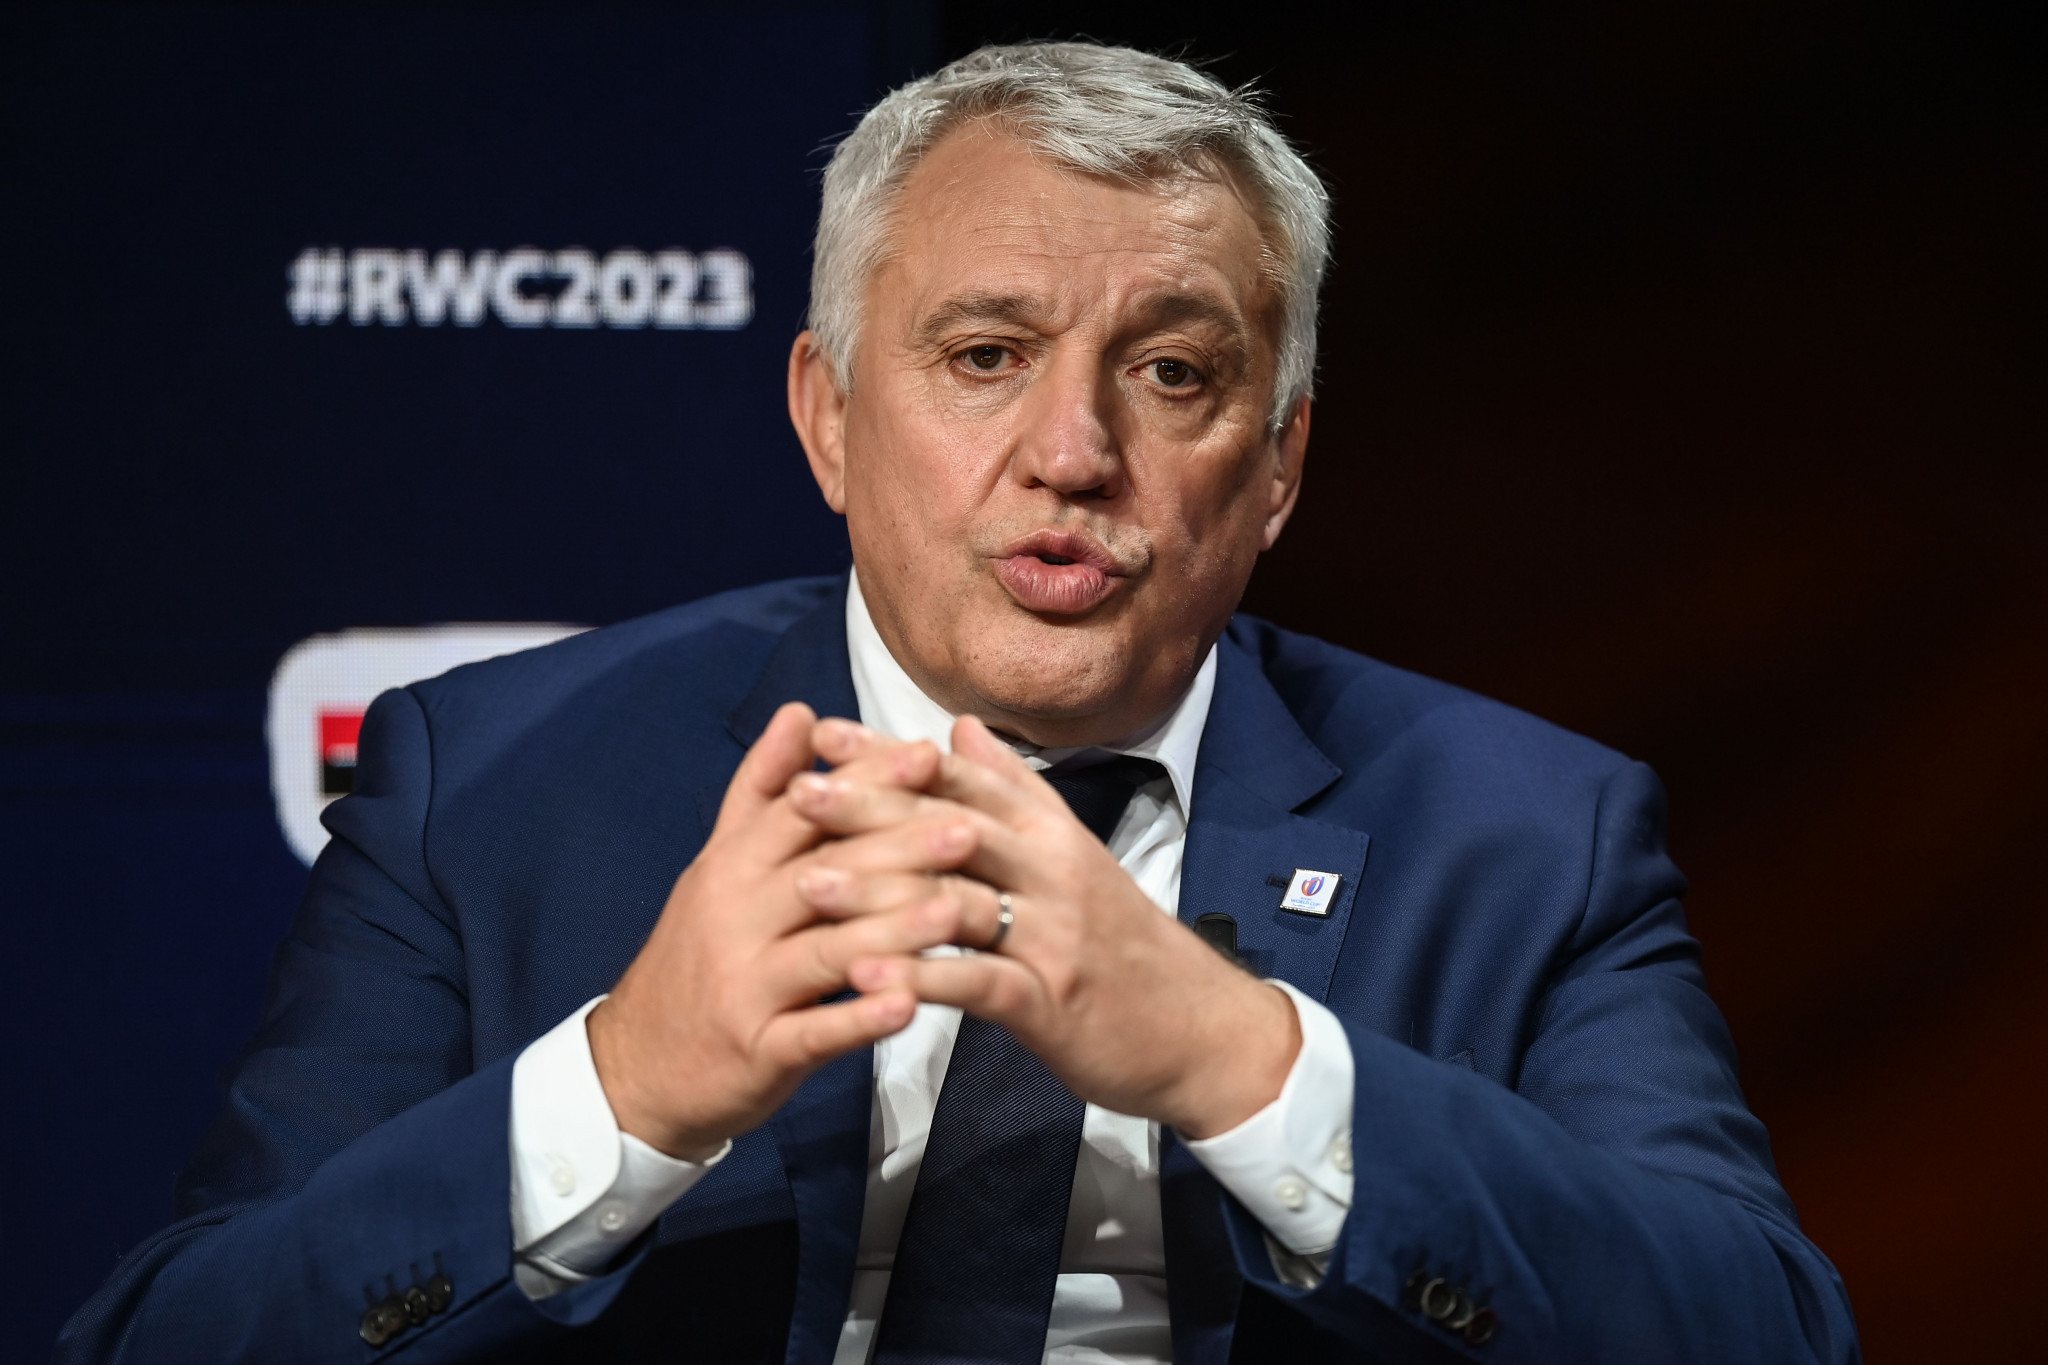 France 2023 Rugby World Cup chief executive Atcher suspended over "social malaise"